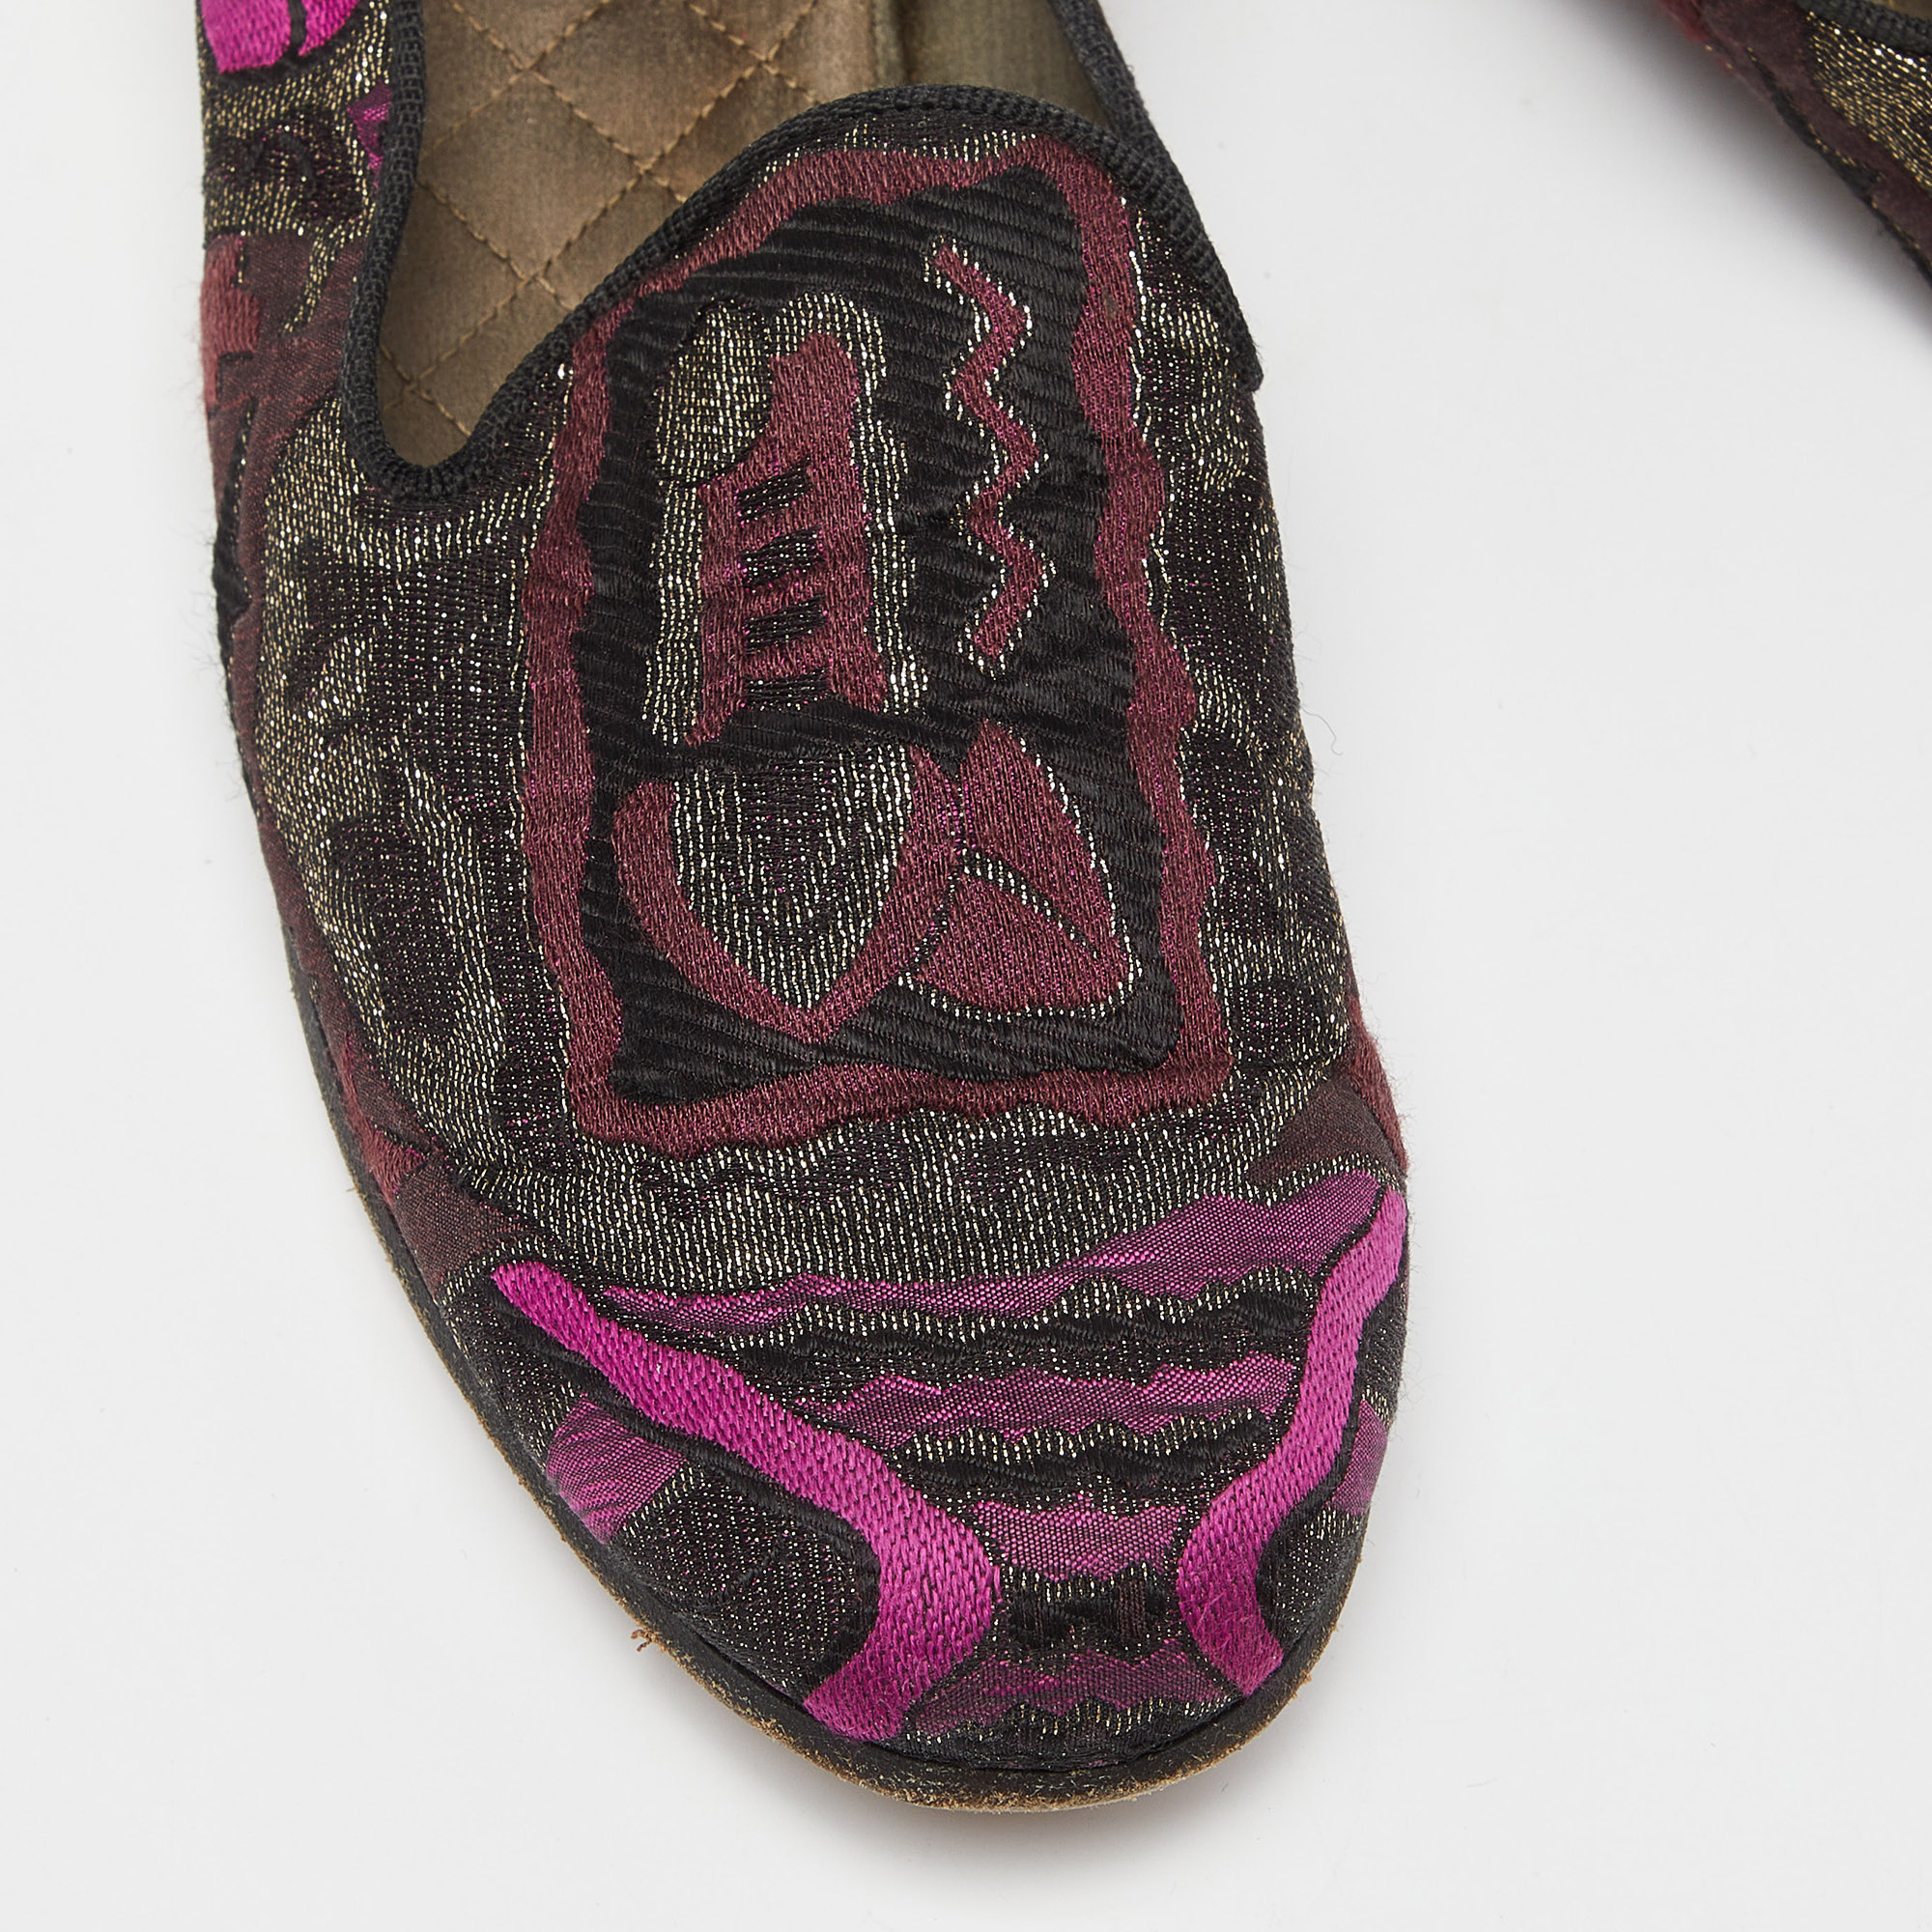 Etro Multicolor Embroidered Fabric Smoking Slippers Size 40